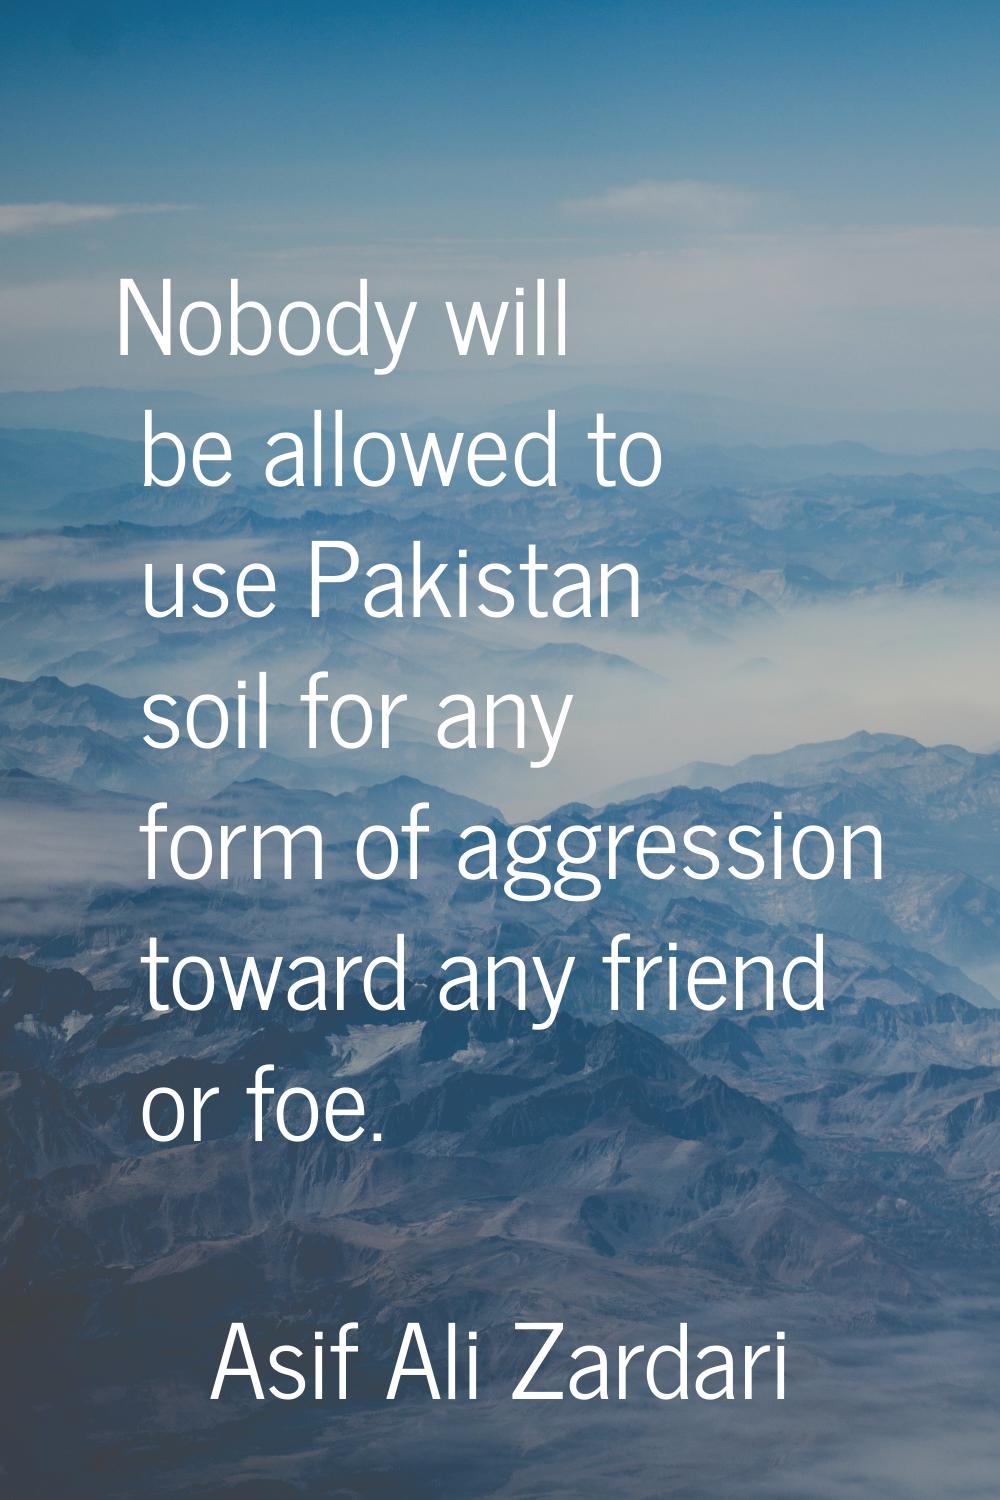 Nobody will be allowed to use Pakistan soil for any form of aggression toward any friend or foe.